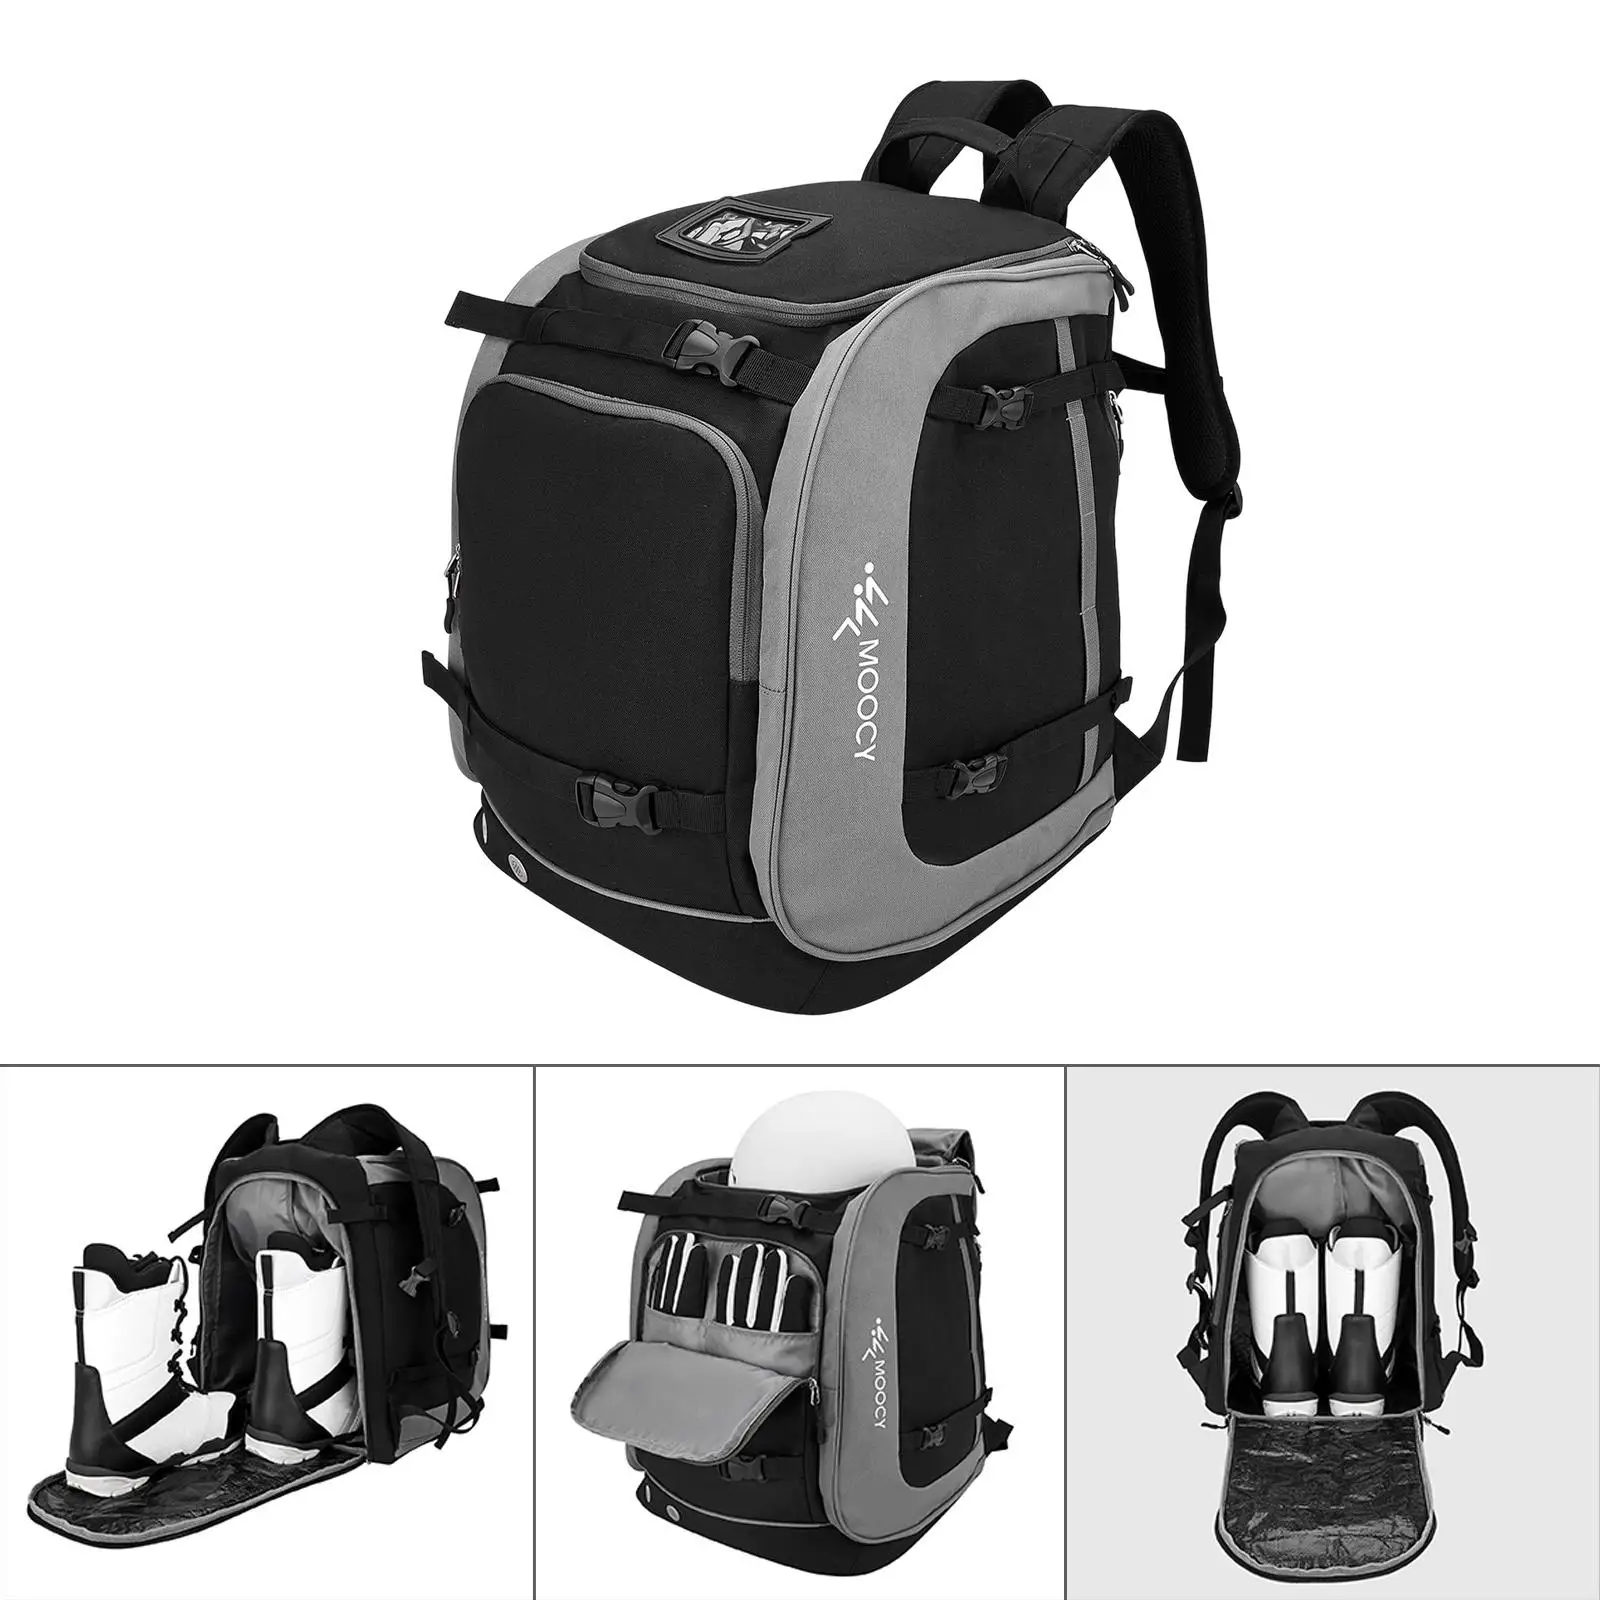 Waterproof 65L Ski Backpack Large Capacity Carrying Bag Boot Bag Compartments Oxford Cloth for Accessories Outdoor Gloves Jacket